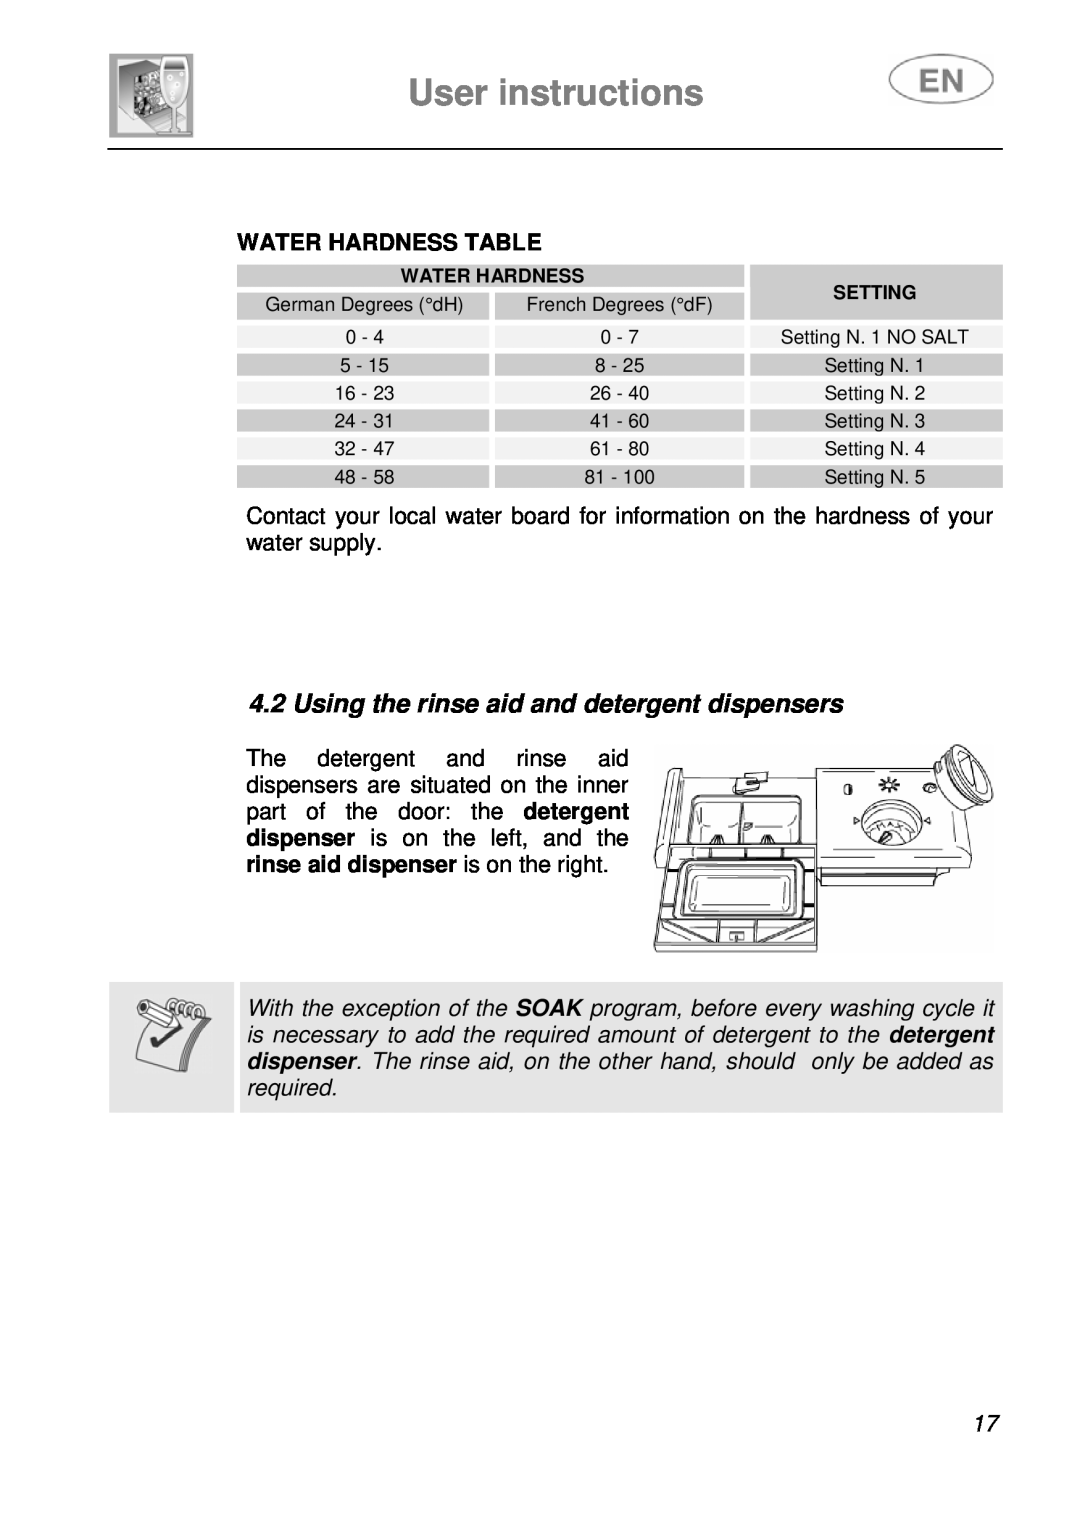 Smeg LVF649B instruction manual User instructions, Using the rinse aid and detergent dispensers, Water Hardness Table 